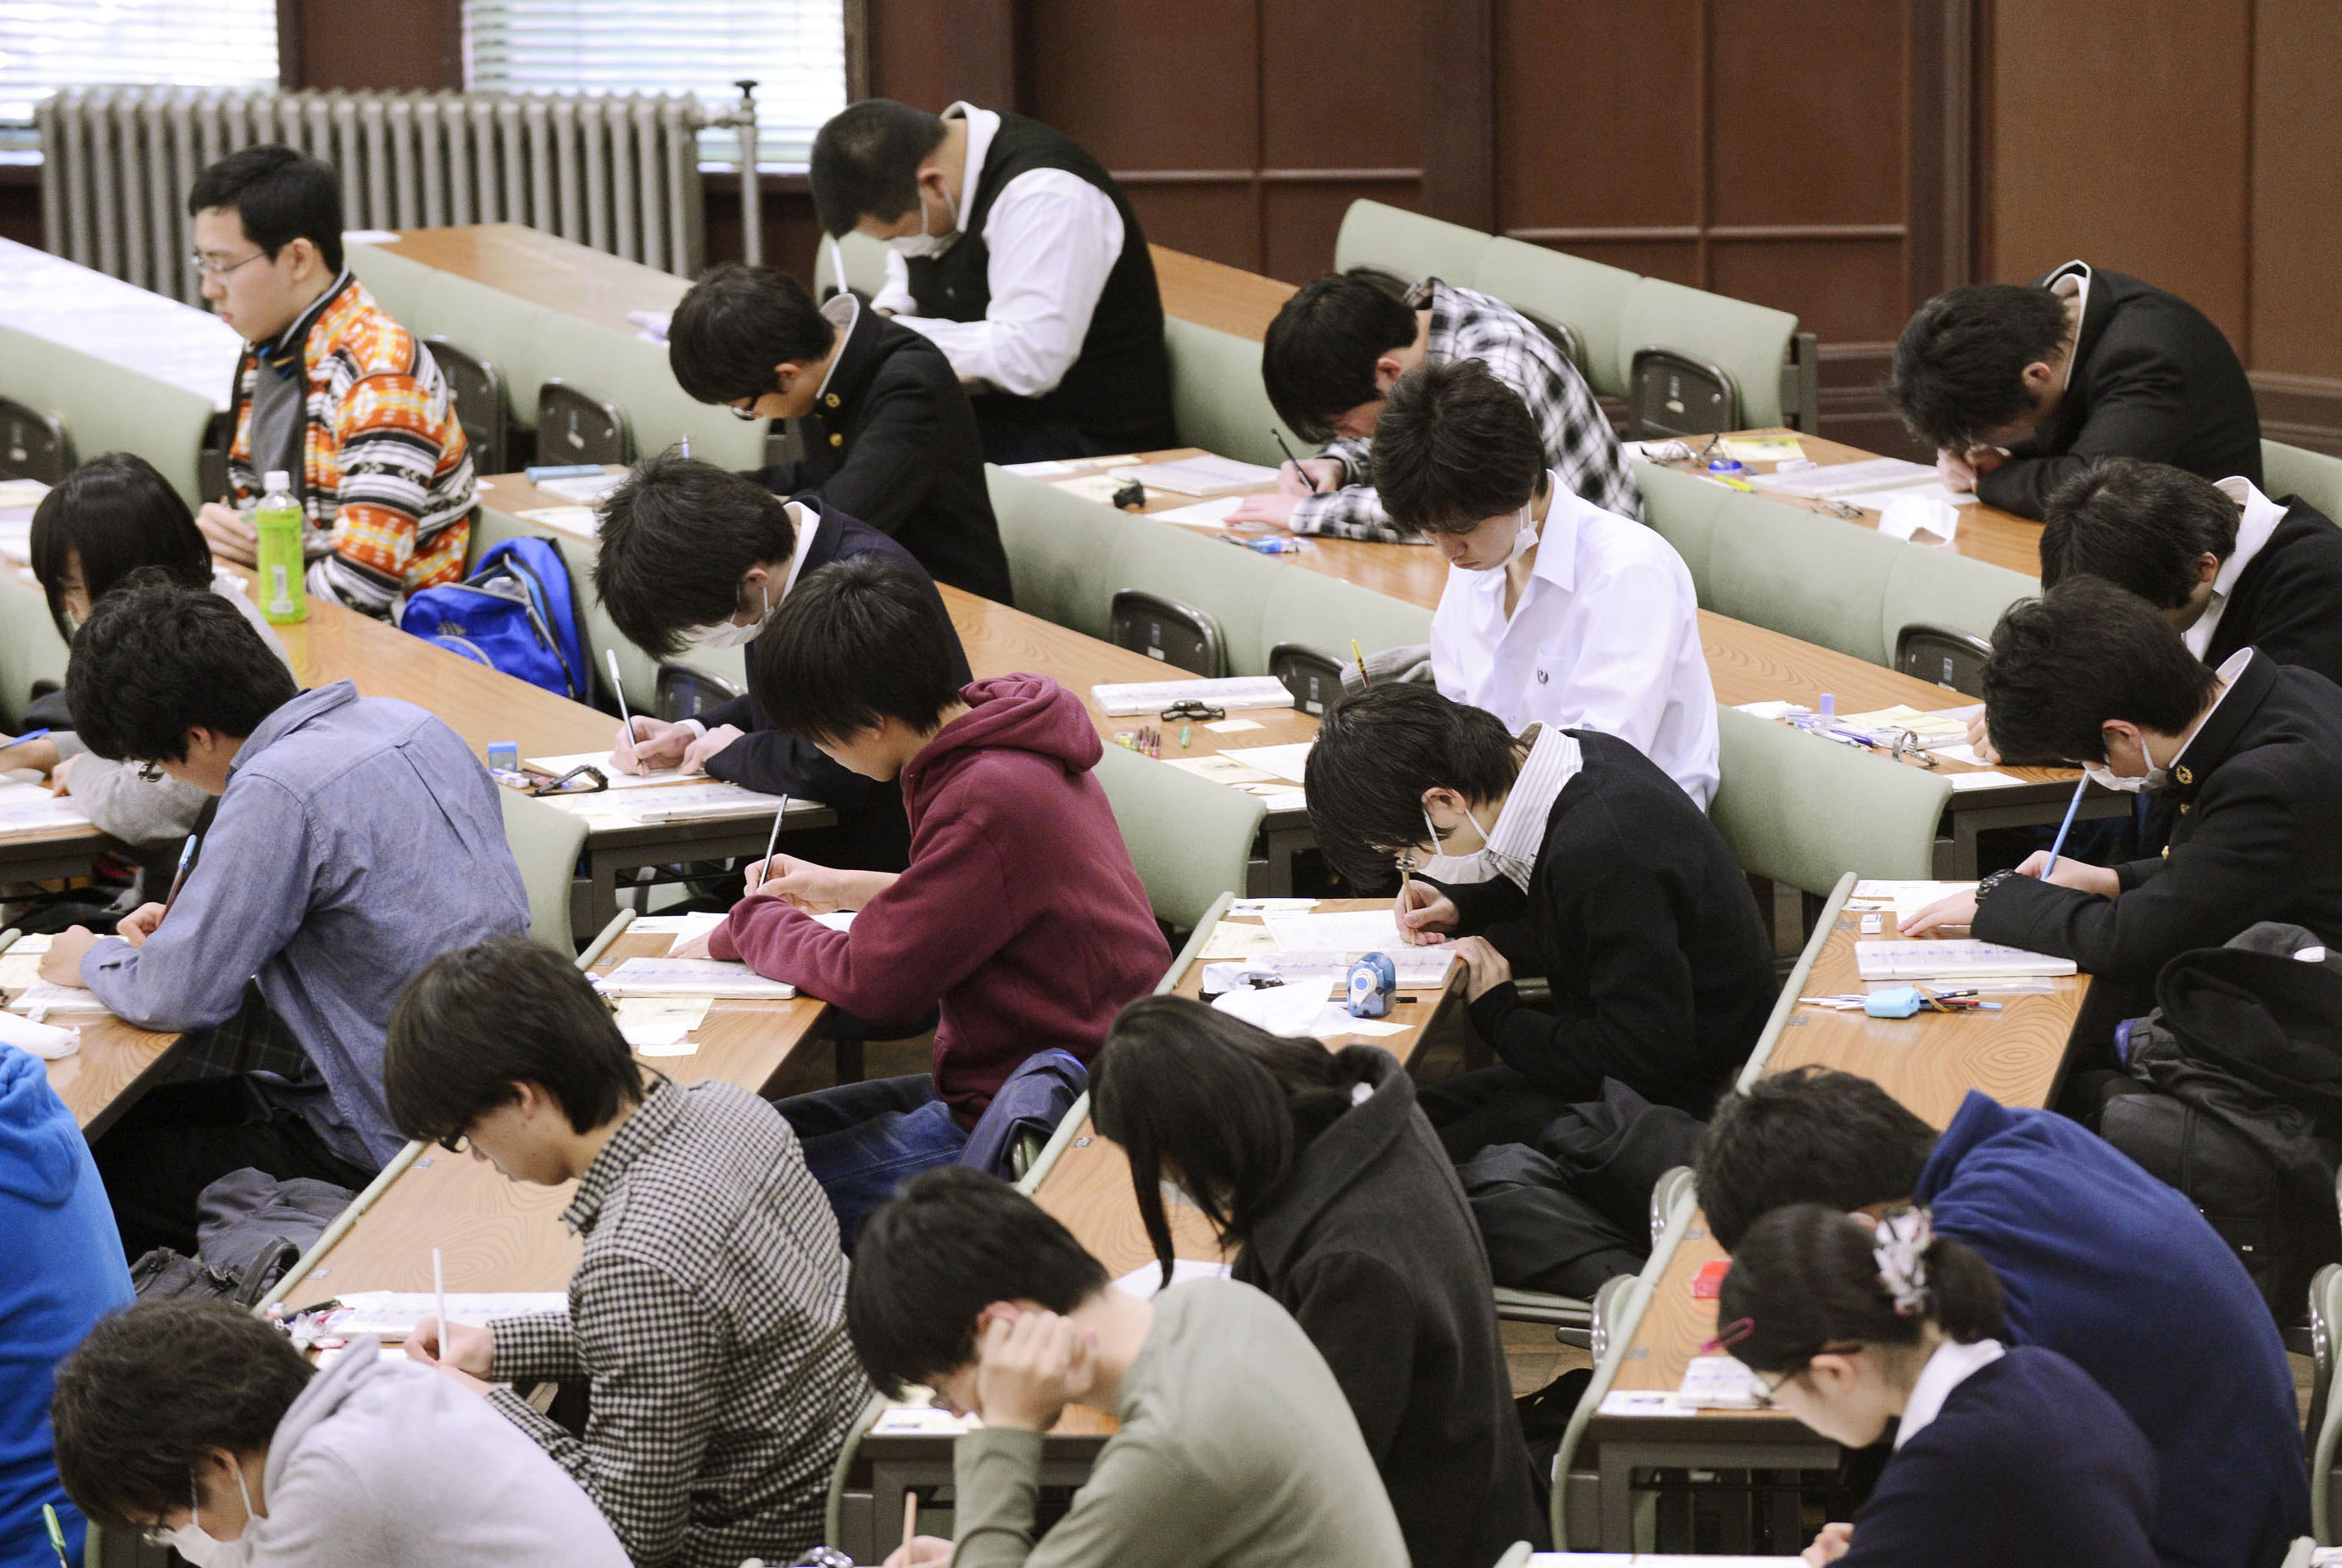 By the book: Applicants take the 'center' standardized exam at the University of Tokyo's Hongo campus in January. | KYODO